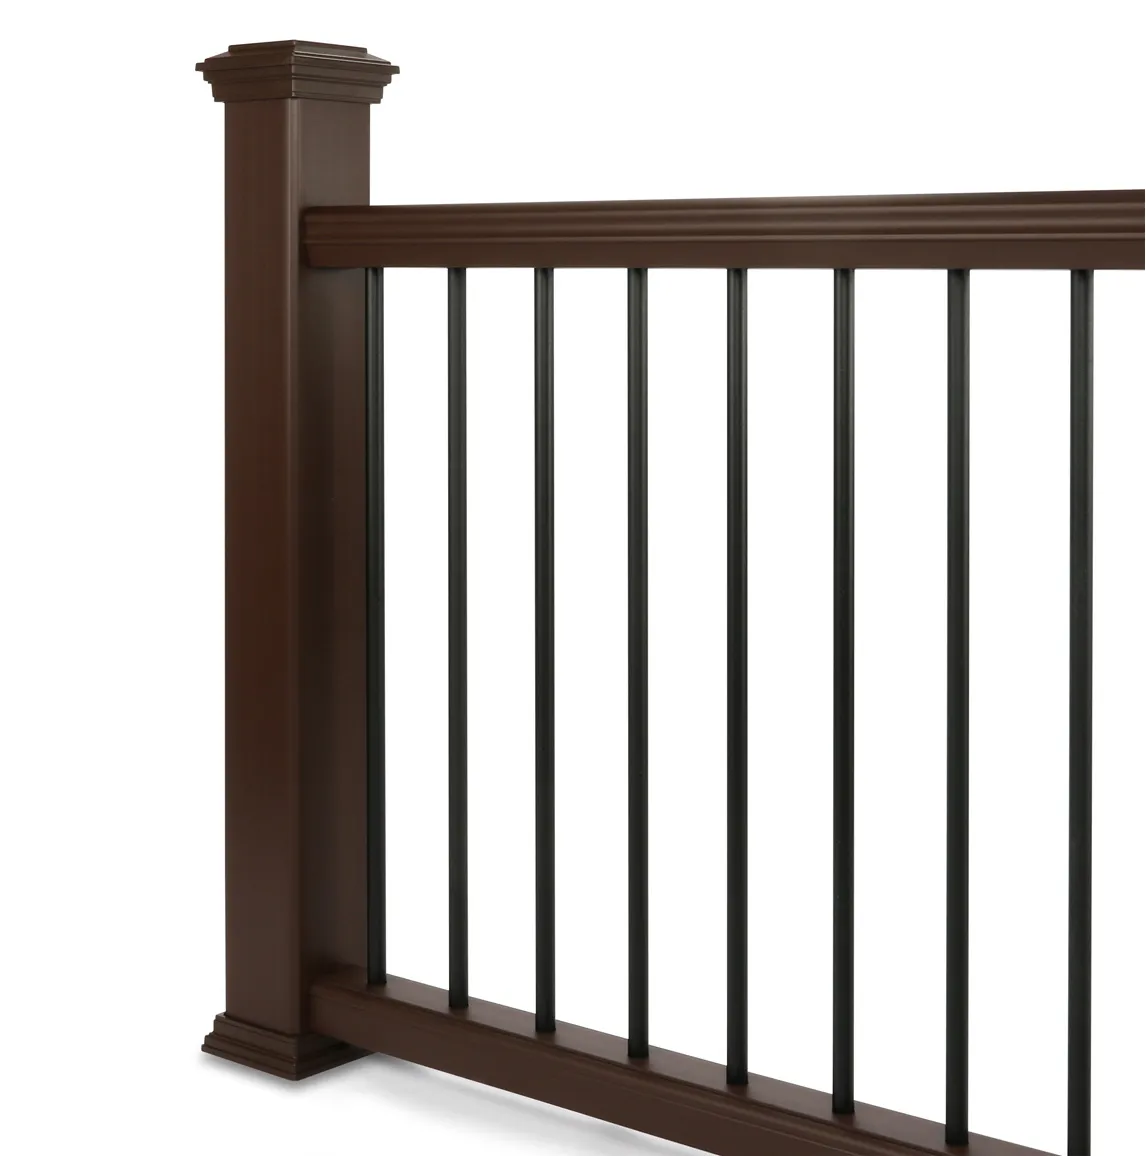 A timeless combination of composite deck posts and rails with modern round aluminum balusters